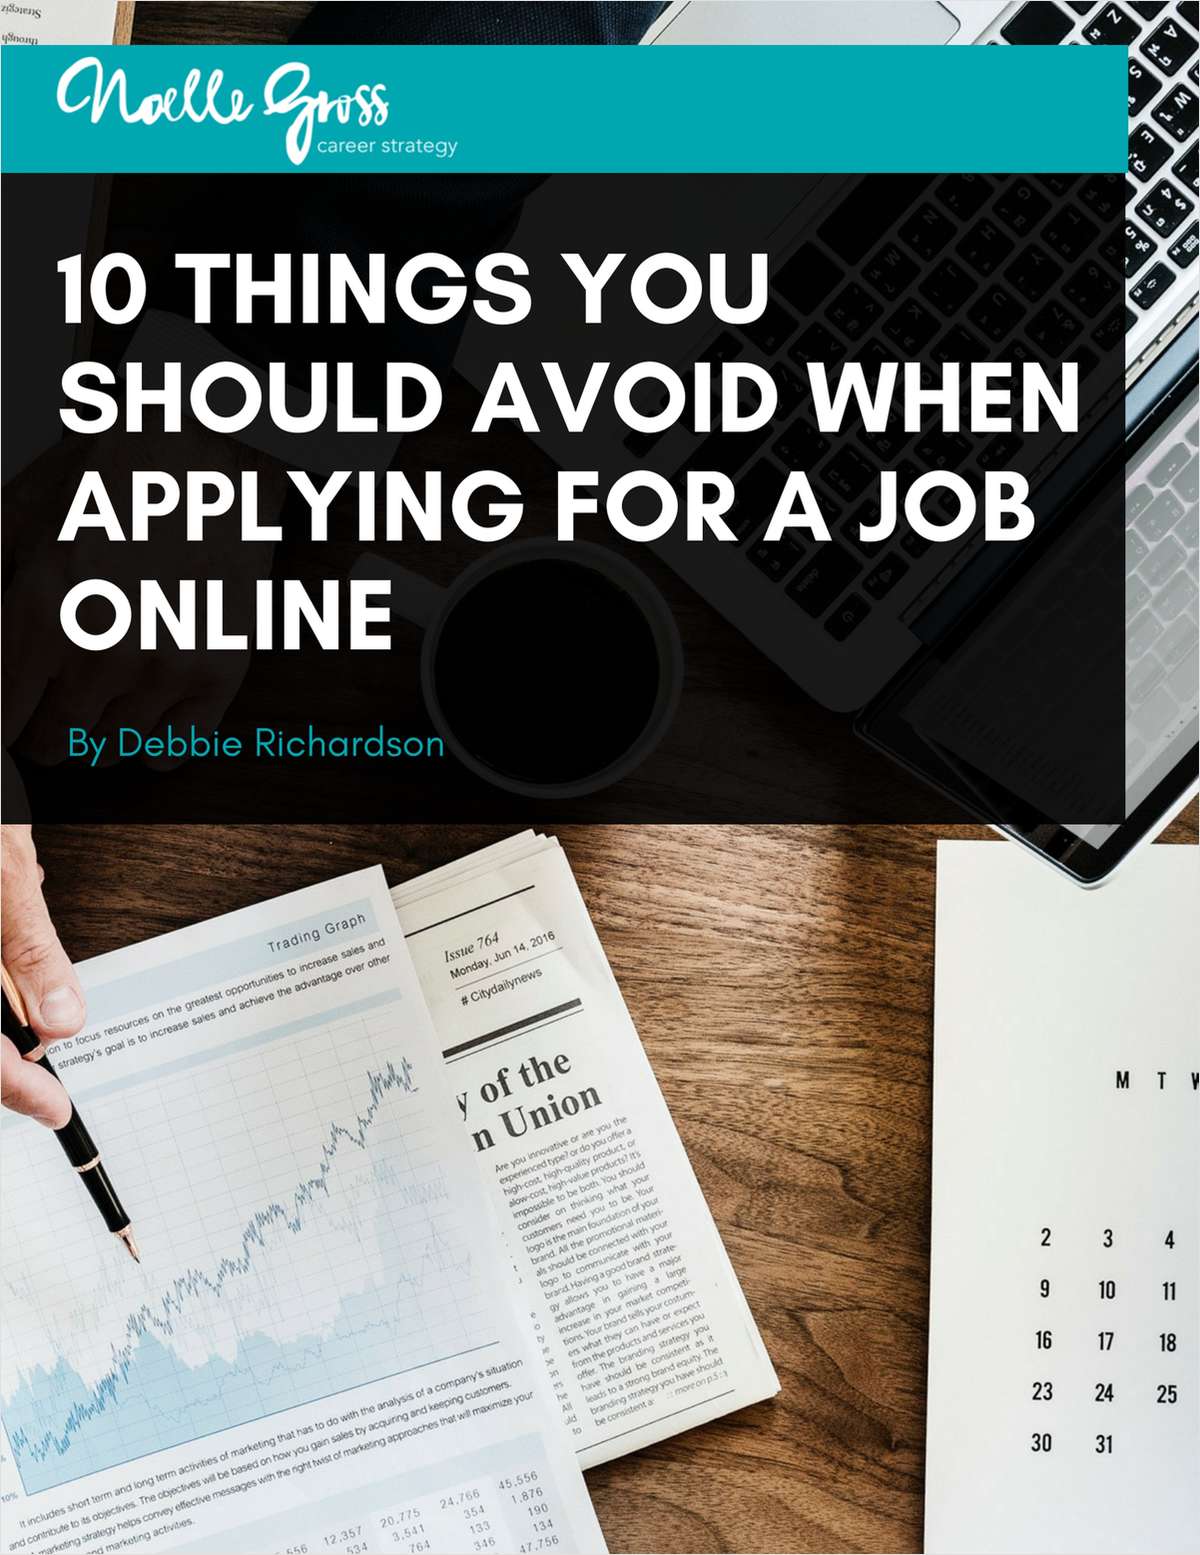 How to get a job after applying online